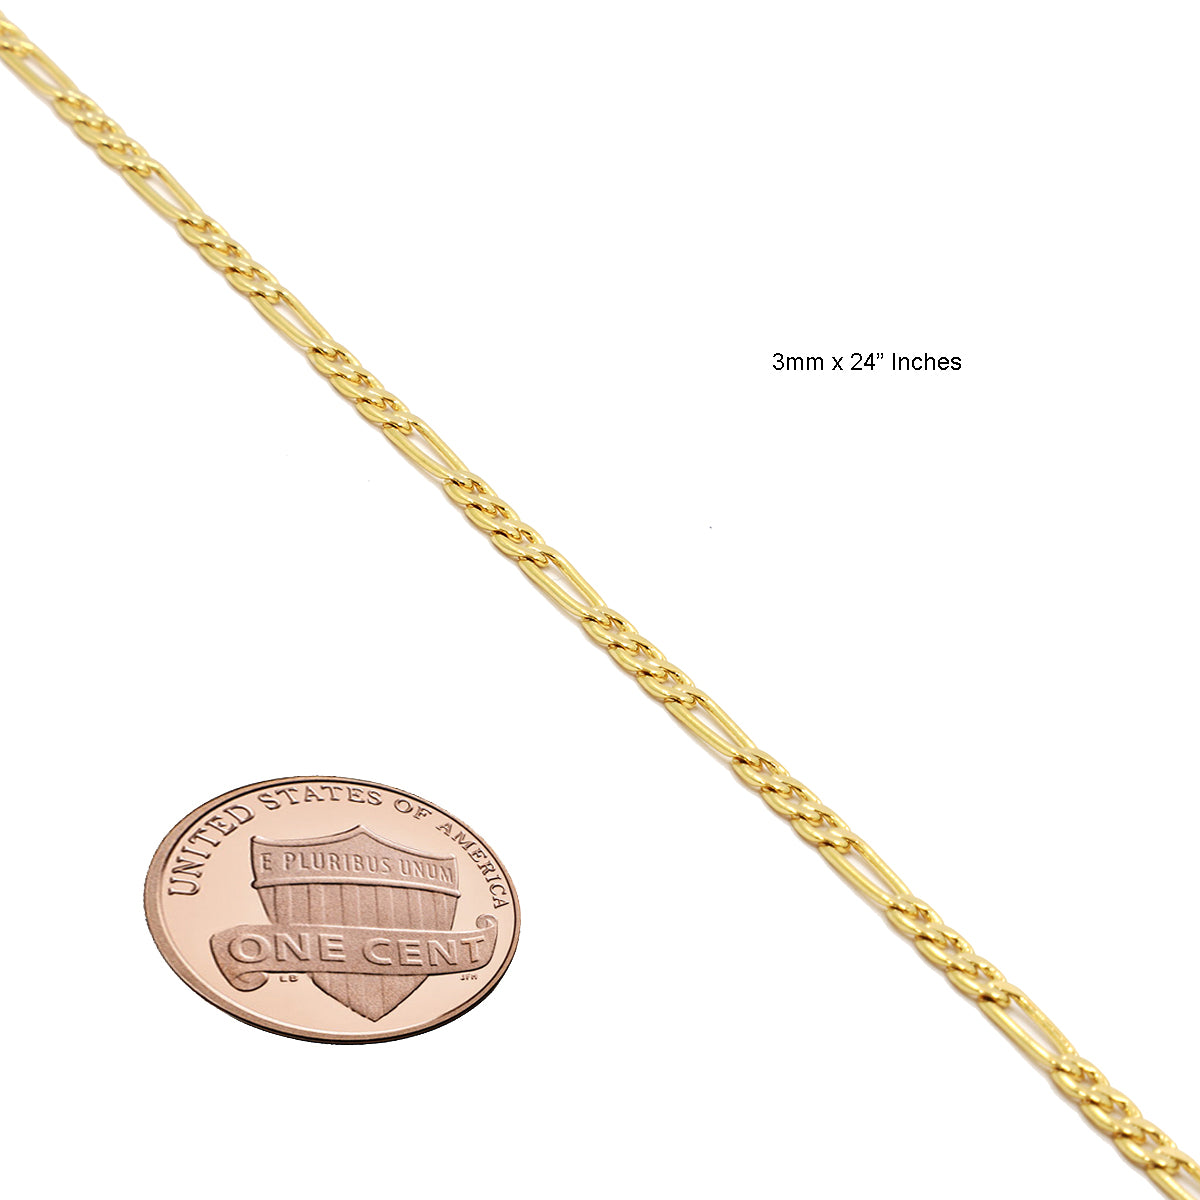 14K GOLD FINISH 3 MM/24" FIGARO LINK CHAIN NECKLACE SLIM